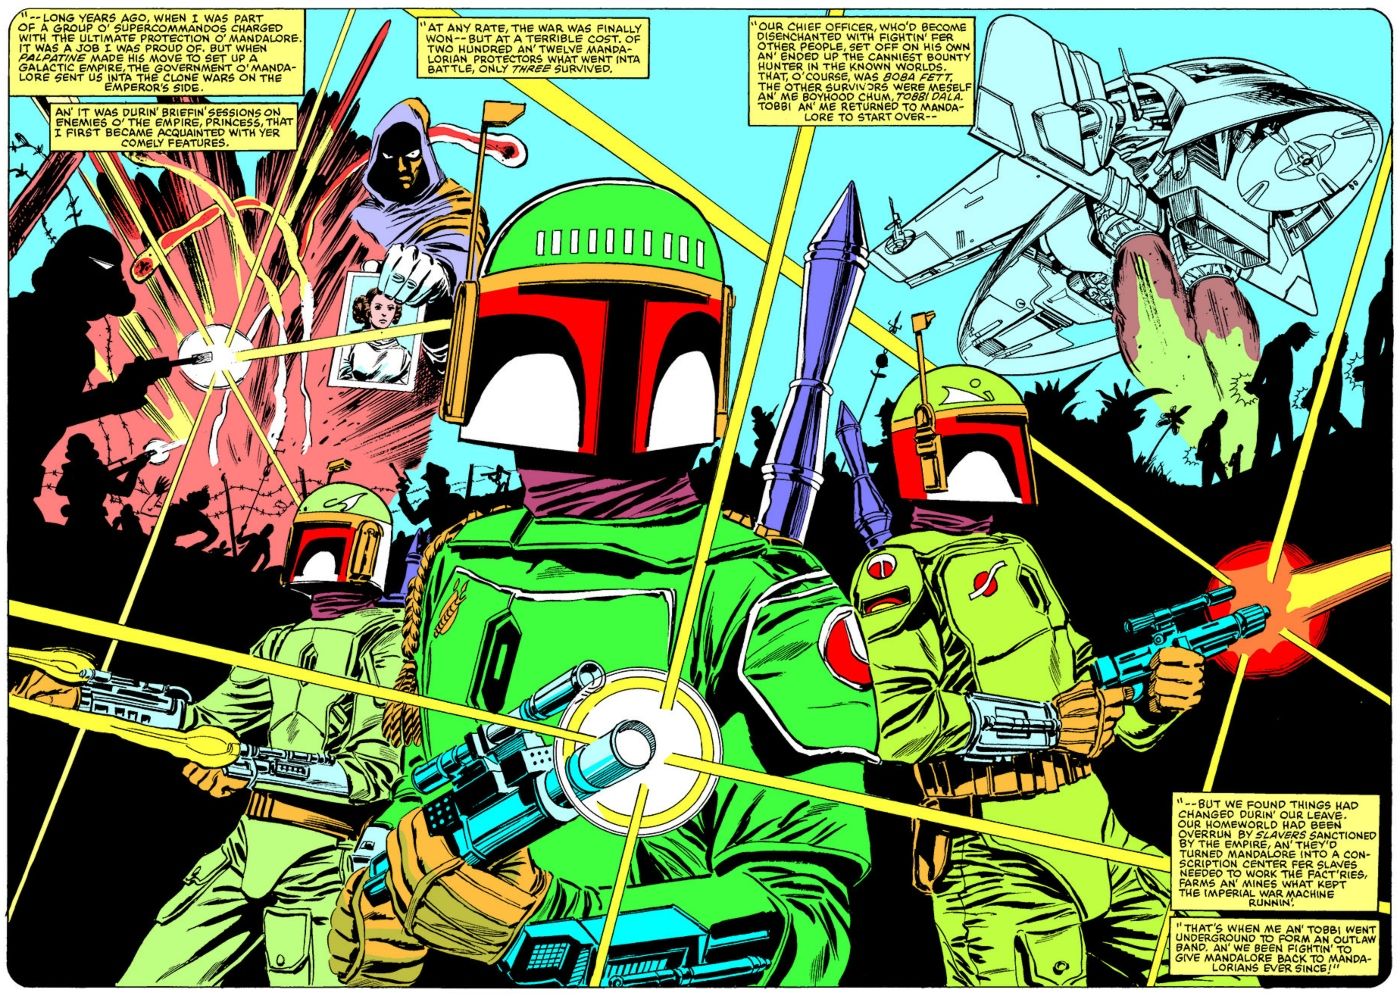 The first appearance of Mandalorians in Star Wars.